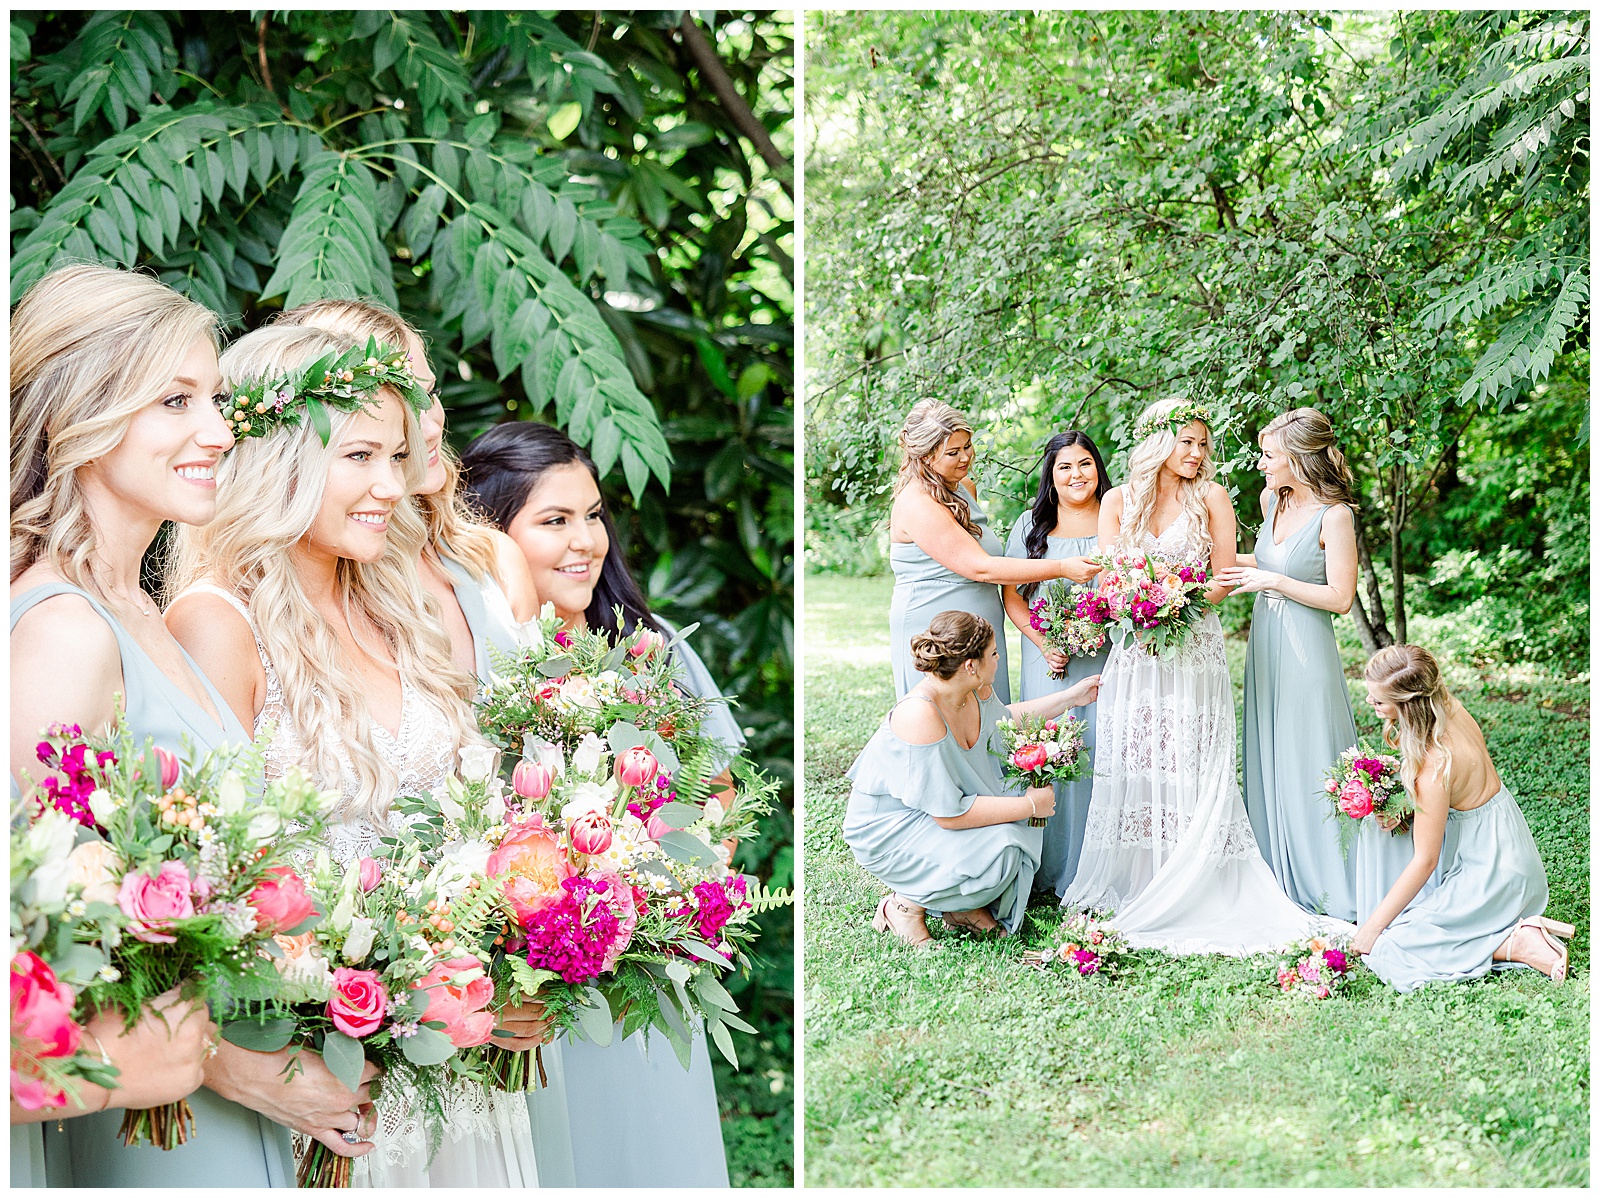 Dusty Blue Bride Tribe Wedding Theme with Gorgeous Bridesmaid Dresses | check out the full wedding at KevynDixonPhoto.com